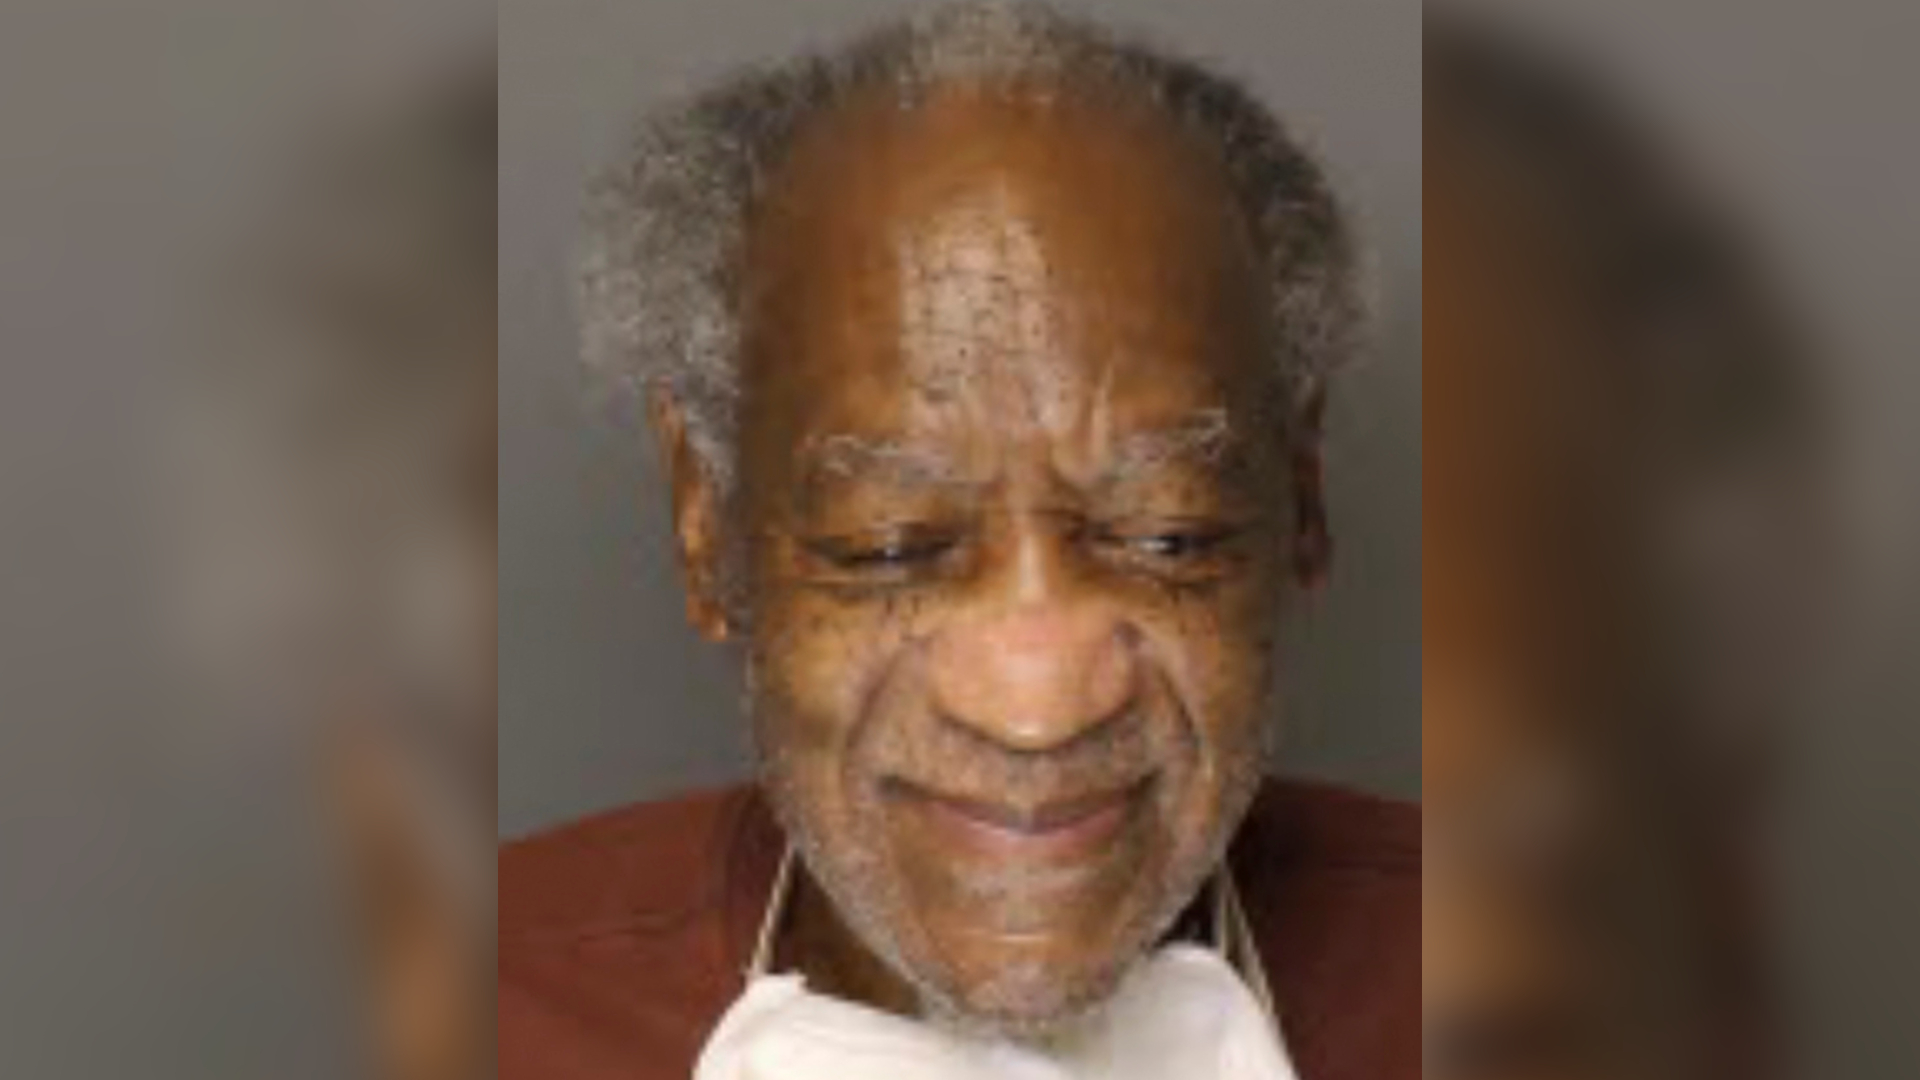 Bill Cosby, Now 83, Seen in Newly Released Prison Mug Shot